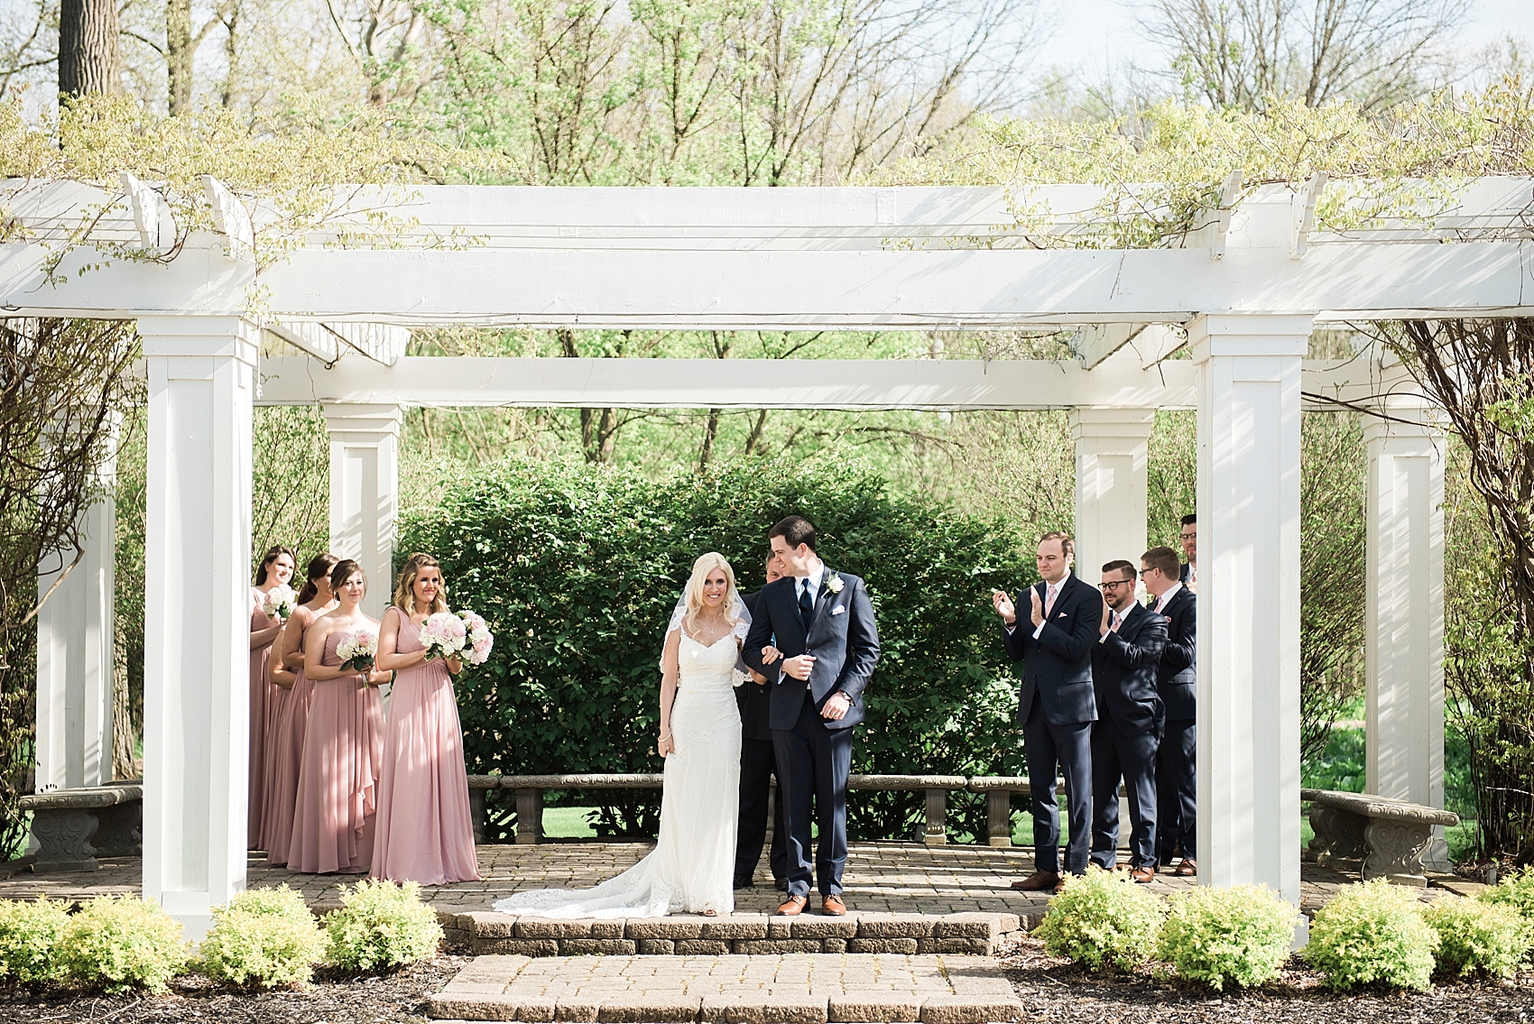 Wellers Carriage House wedding photos in Saline; ceremony photos